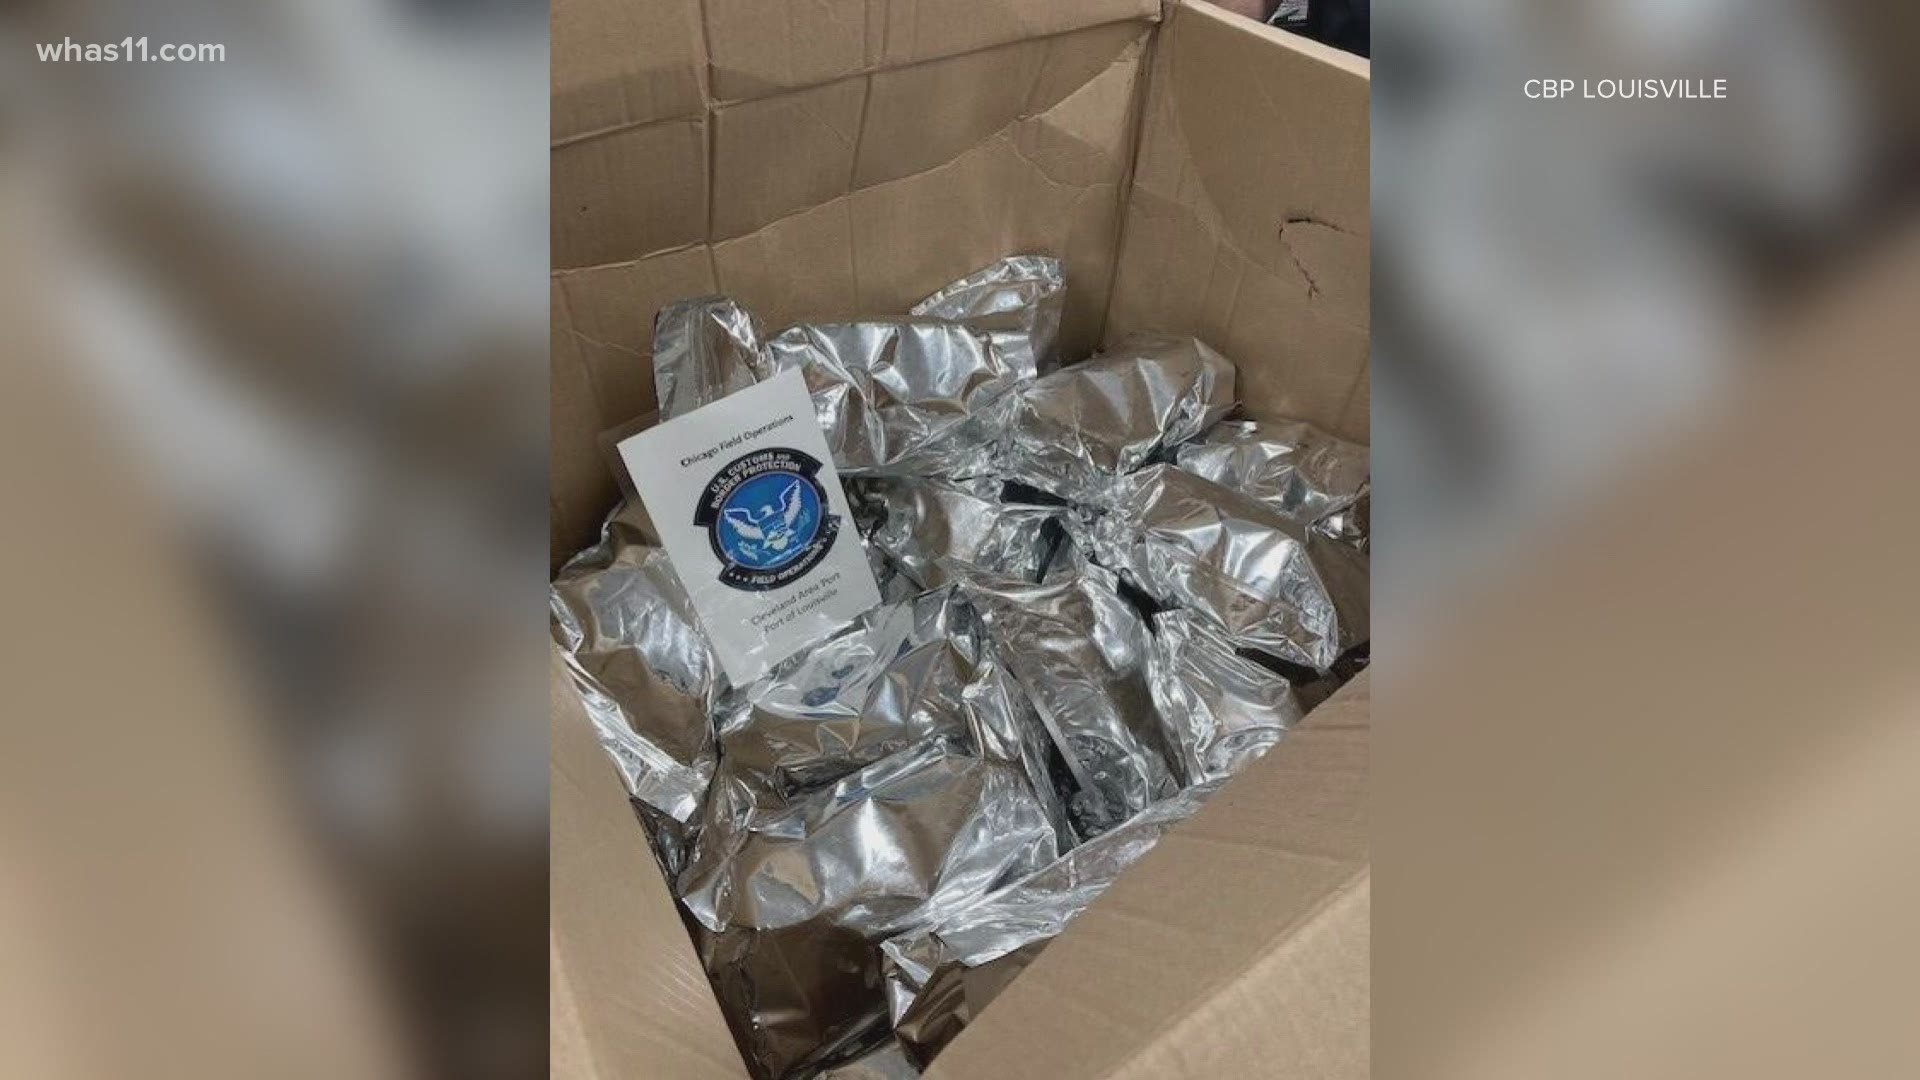 The shipment was bound for Hong Kong and originated in Mexico. Officials say the the shipment had a street value of over $2 million.